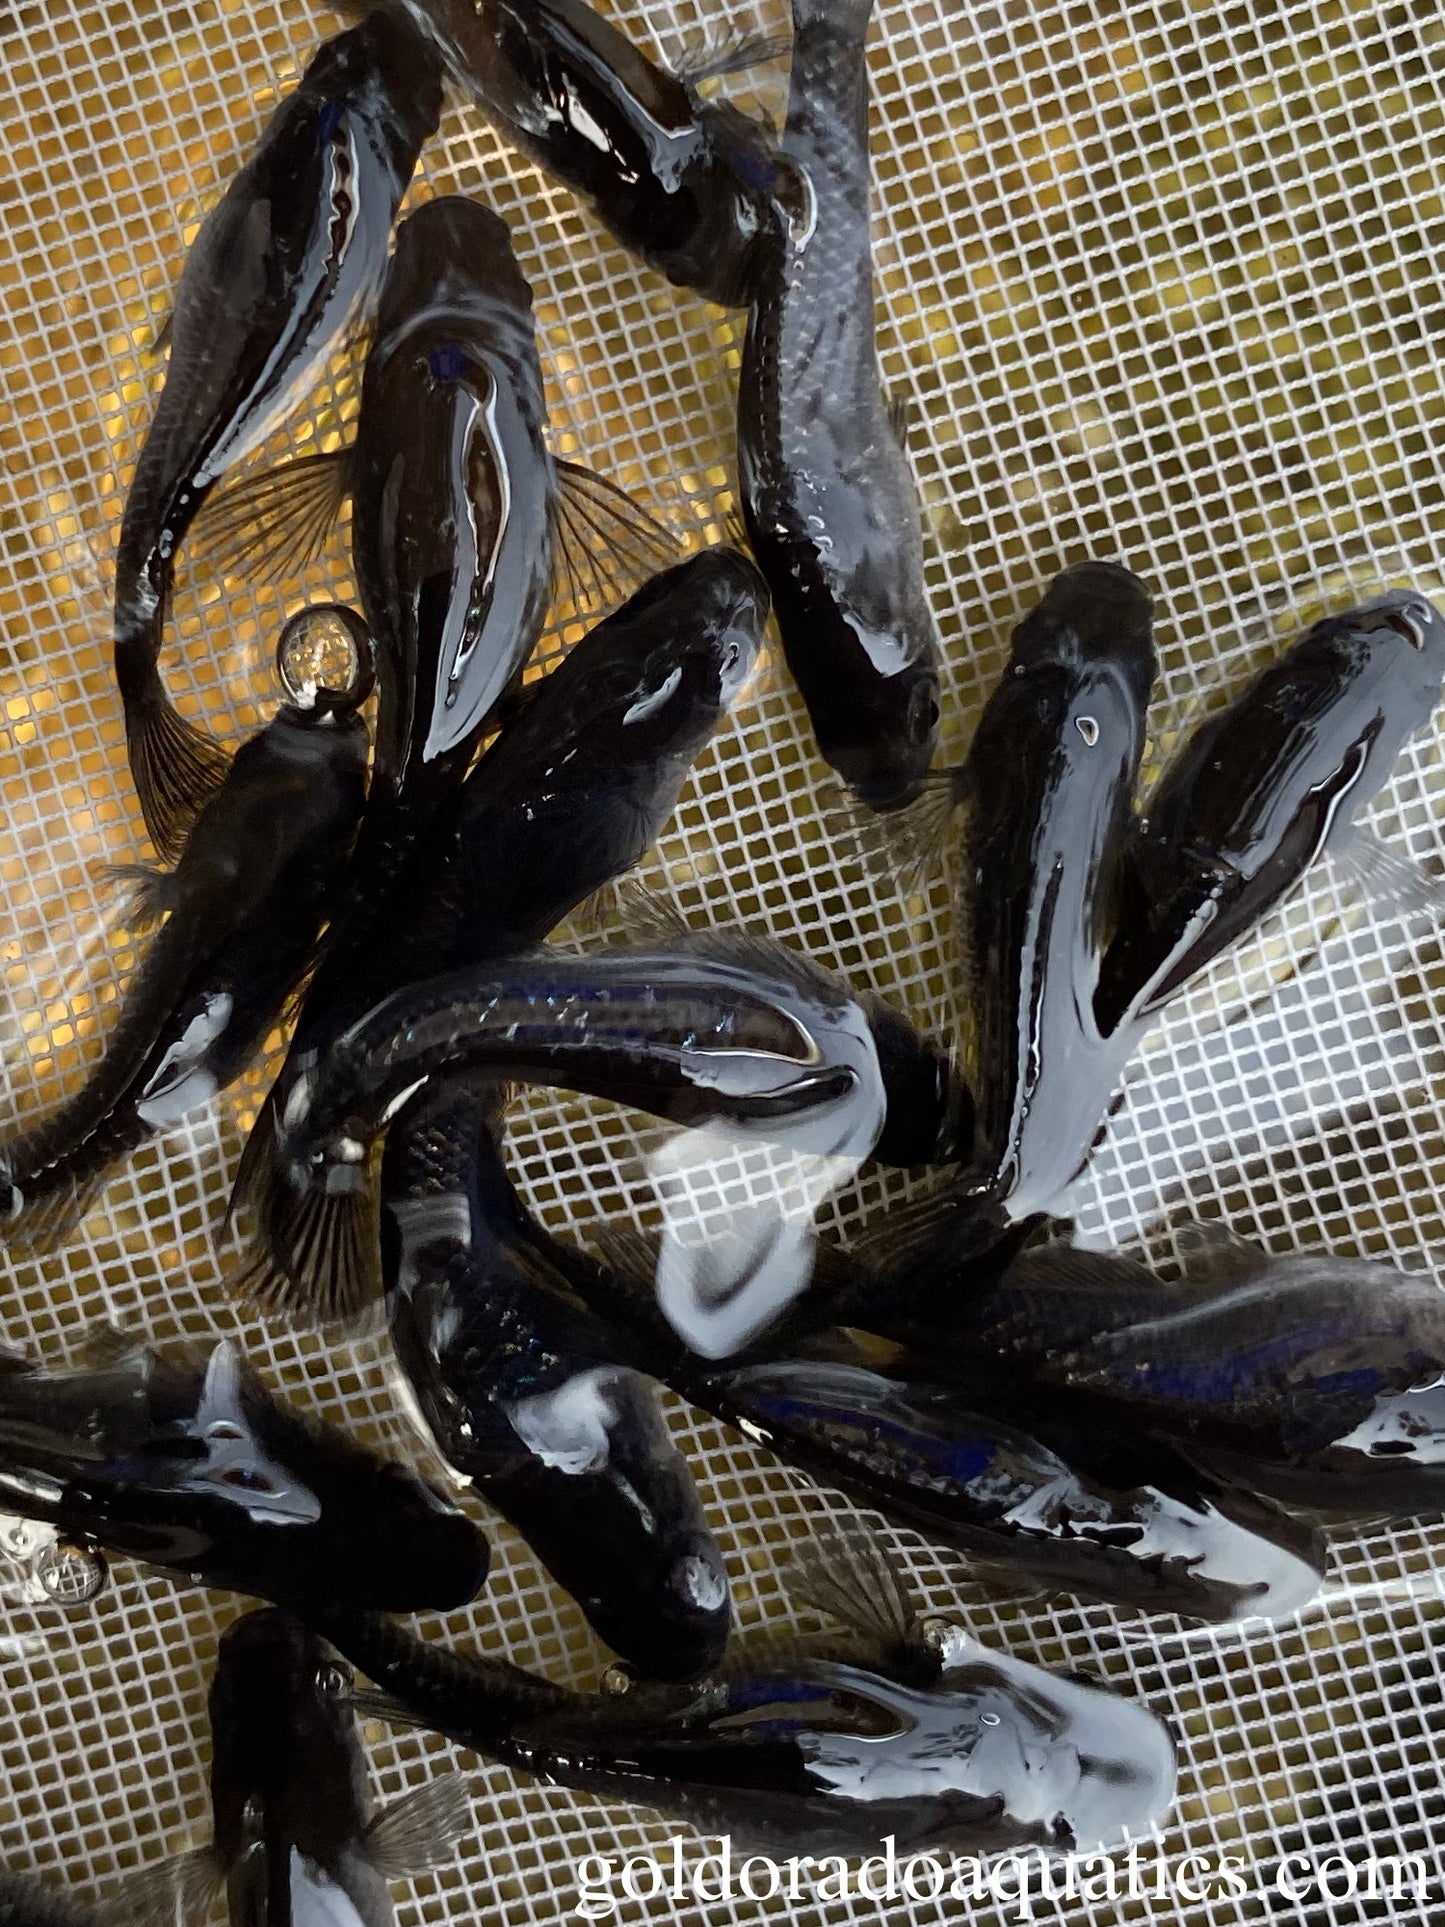 An image of a shoal of black Japanese rice fish caught in a net.